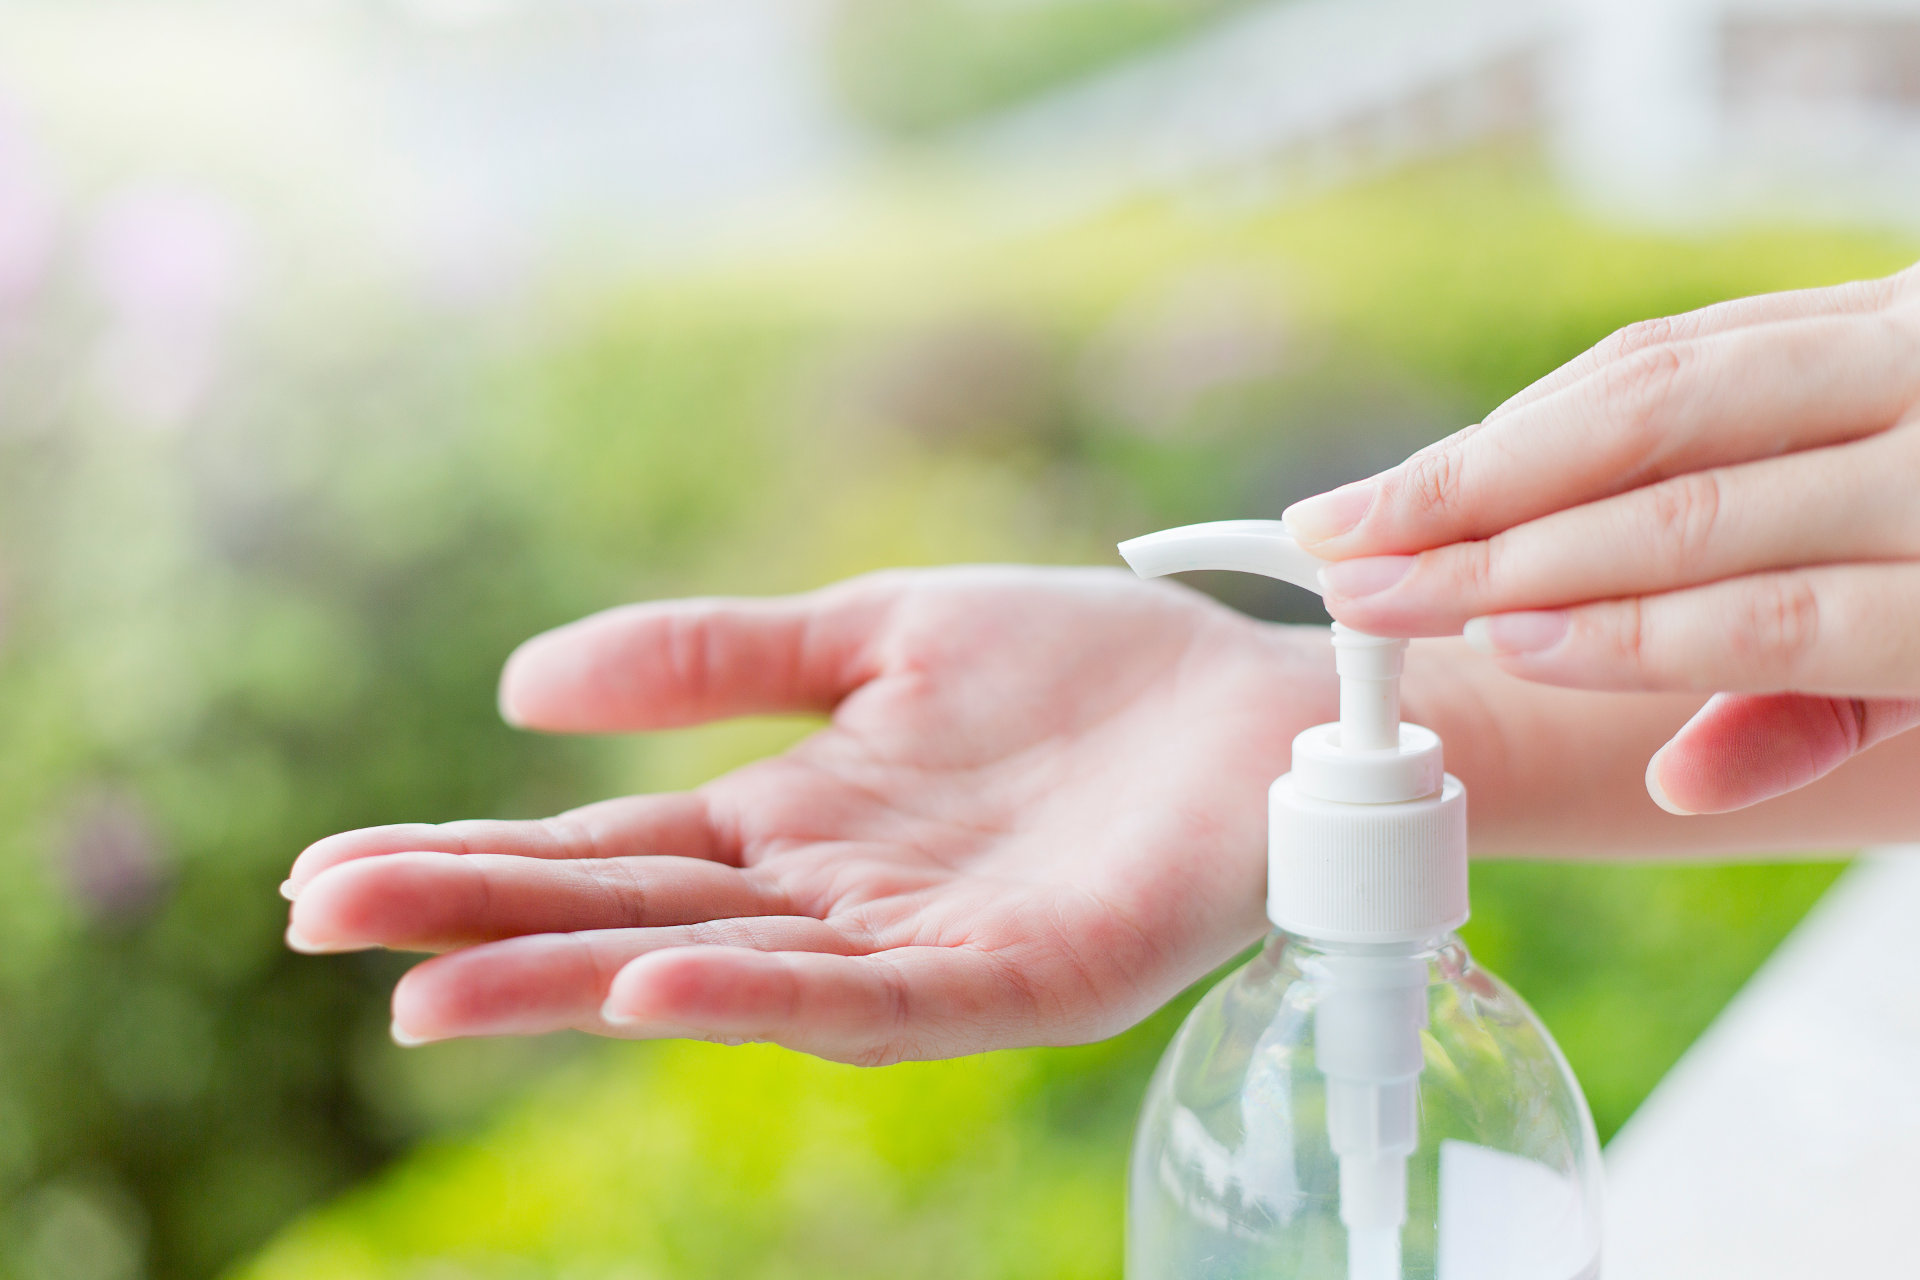 Person squeezing sanitizer into their palm from a bottle with a white pump